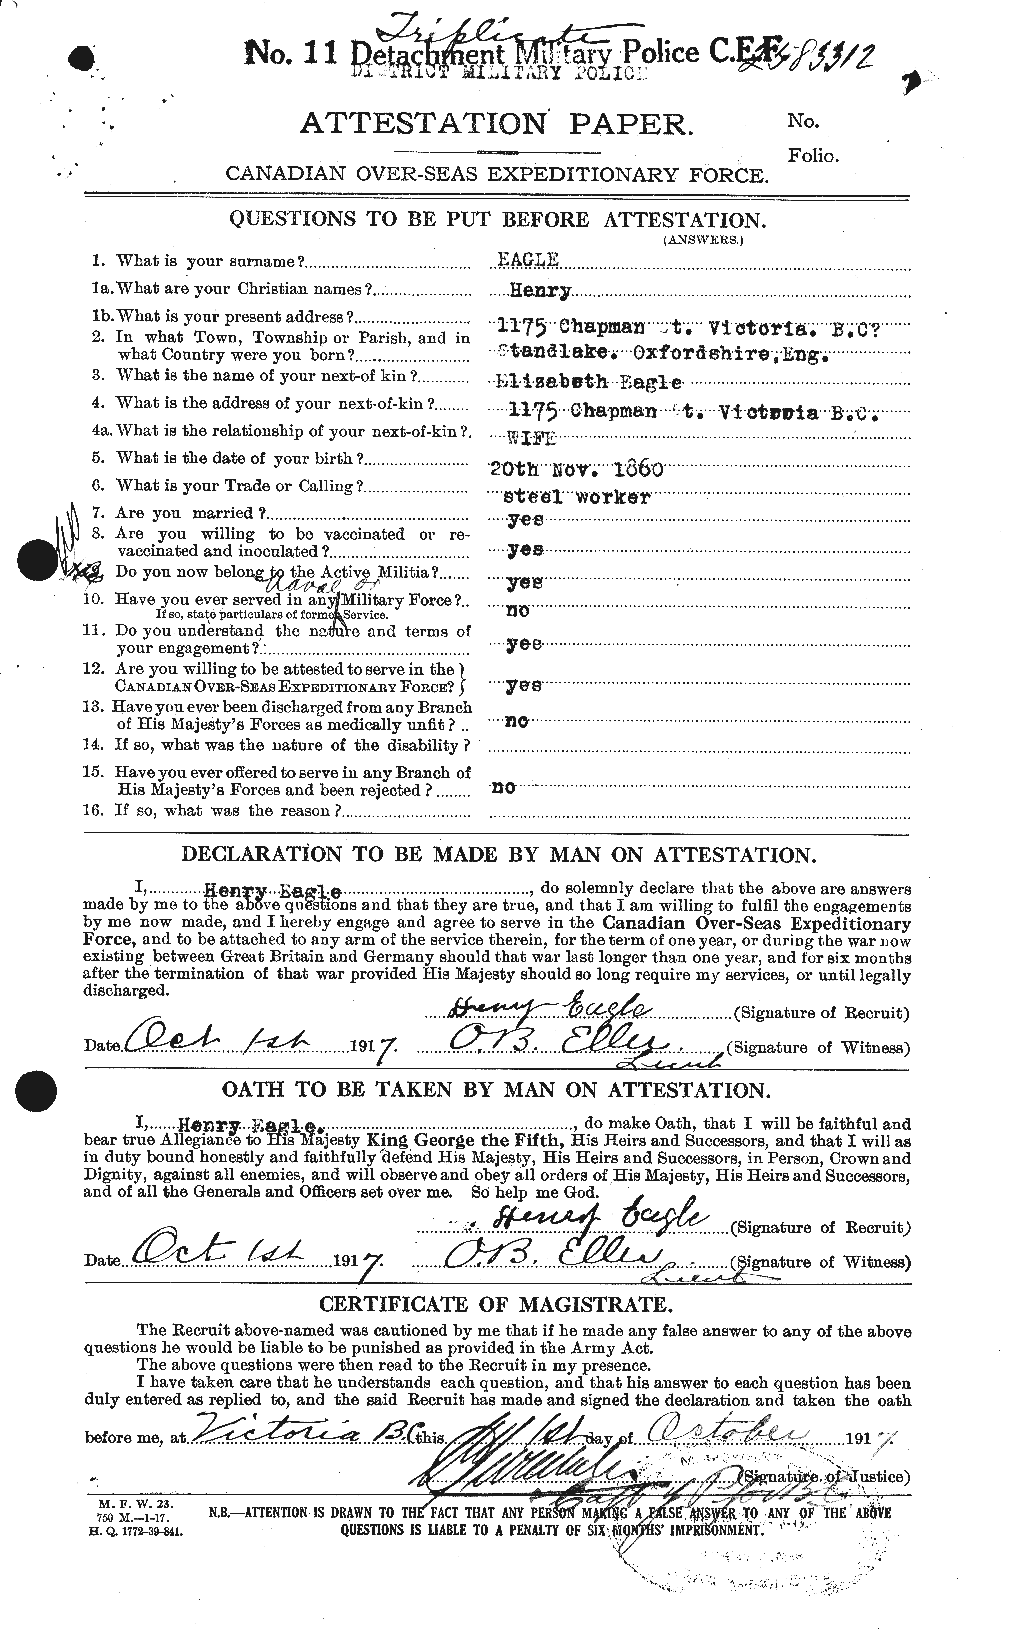 Personnel Records of the First World War - CEF 308837a